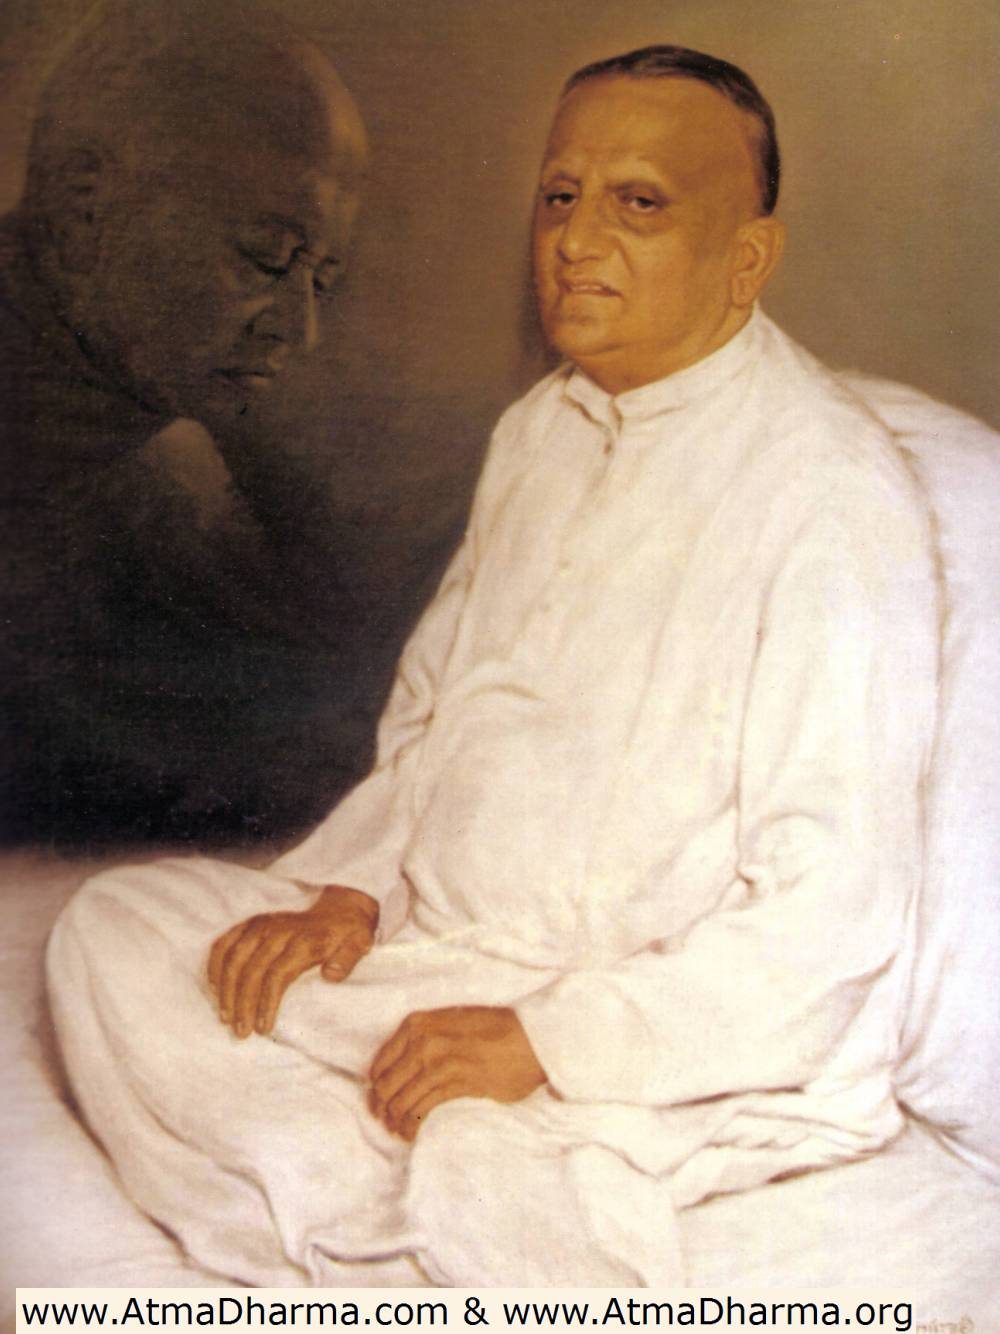 Pujya Nihalchandra Sogani was a student of Gurudev Shree Kanji Swami. He obtained smayakt darshan (self-realissation) by hearing just one lecture by Gurudev Kanji Swami. the words in Gurudev's lecture that enabled Pujya Soganiji to understand the difference between soul and non-soul were 'knowledge and attachment are different'.